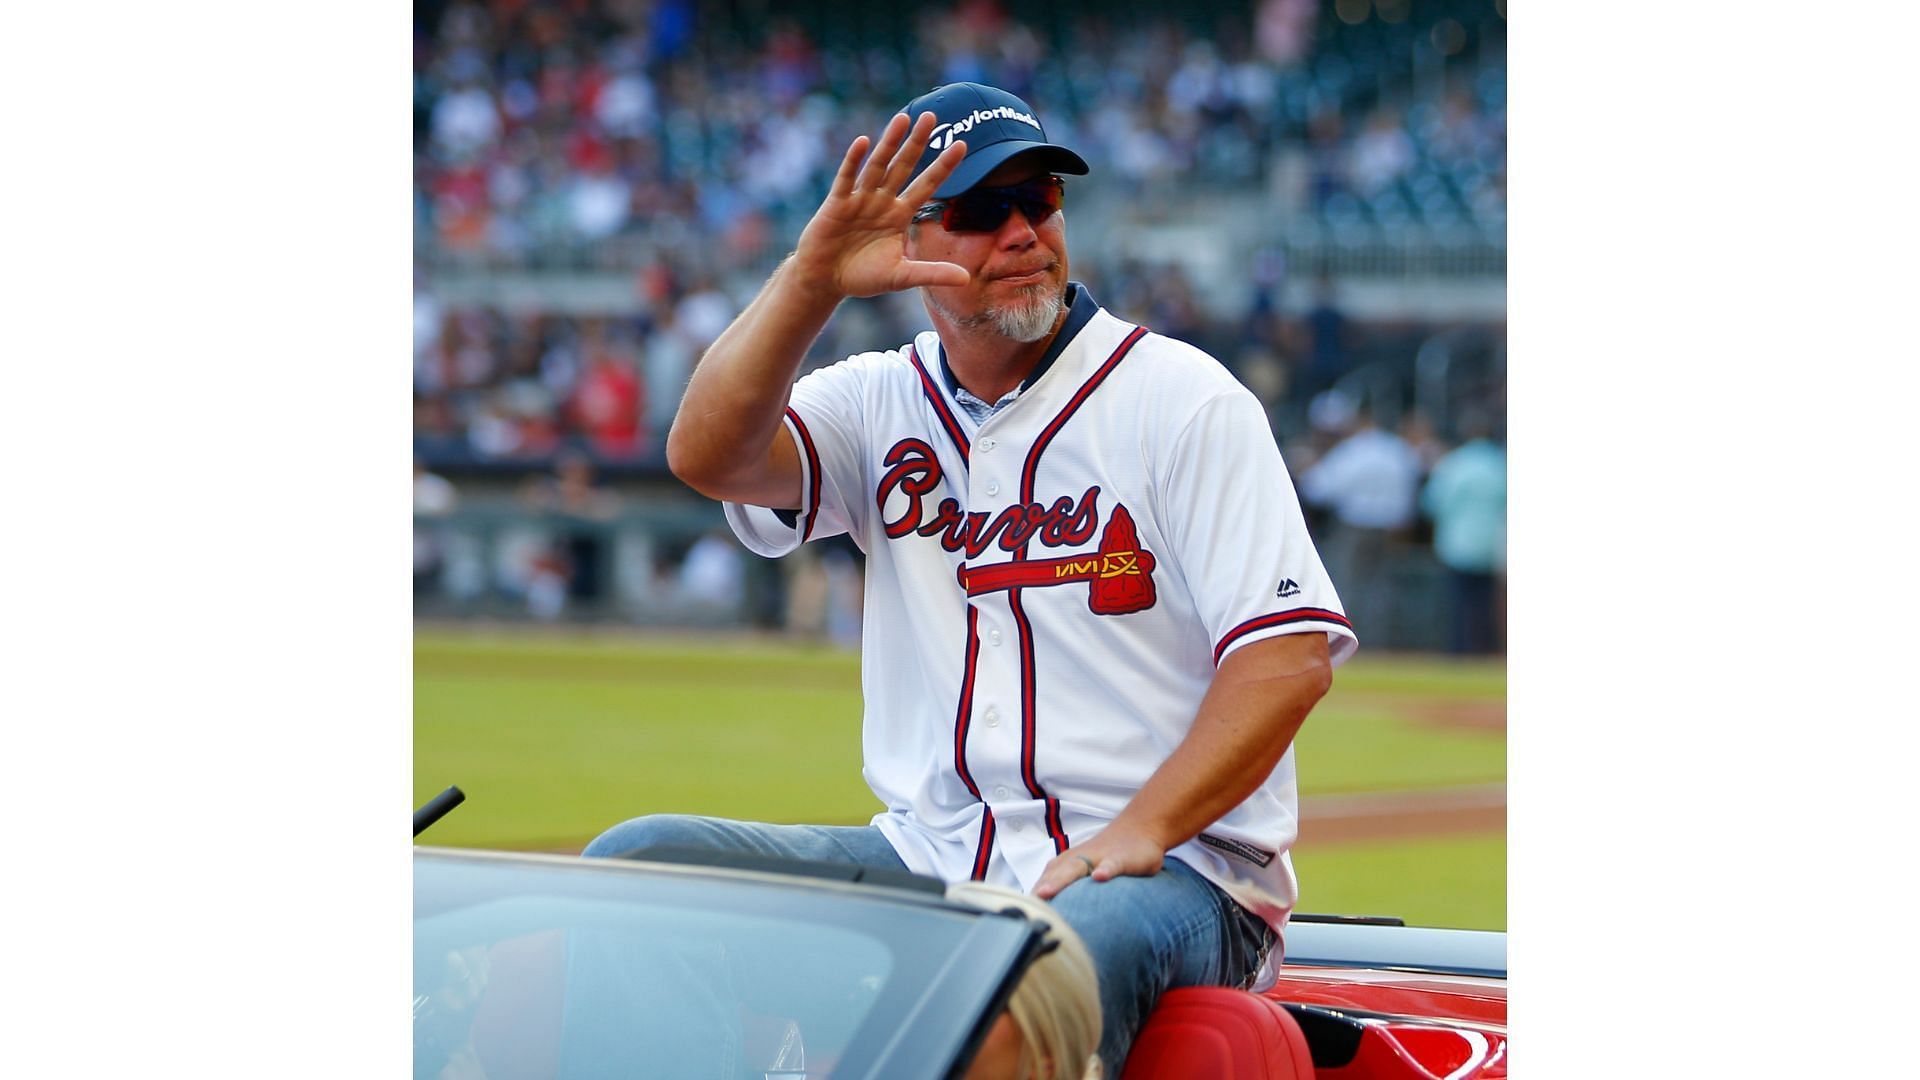 Chipper Jones is proud of the young men playing in that there Fiesta Bowl 